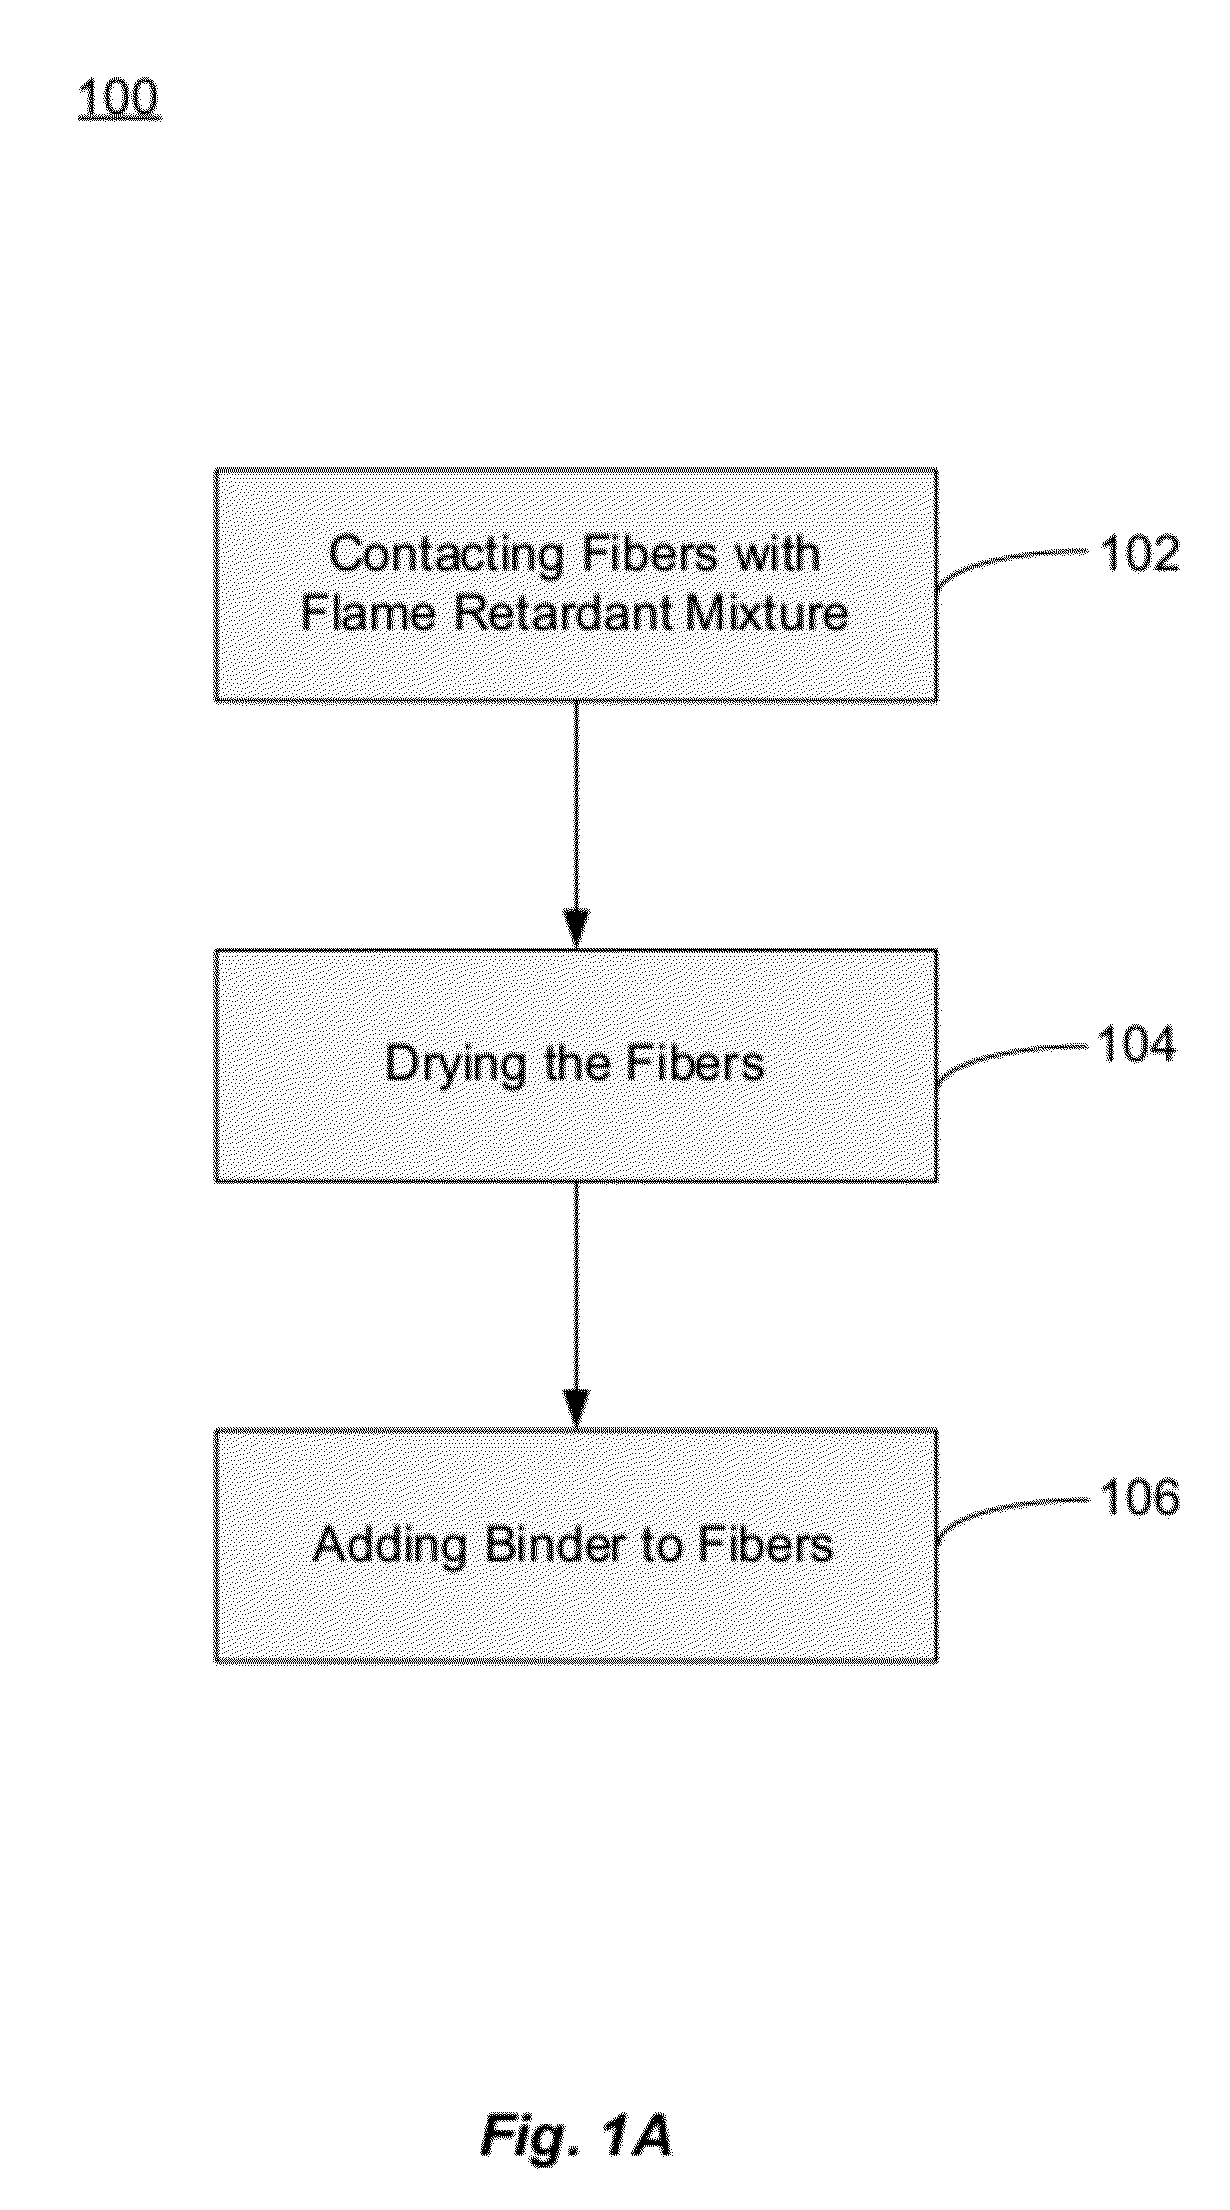 Fiberglass composites with improved flame resistance from phosphorous-containing materials and methods of making the same